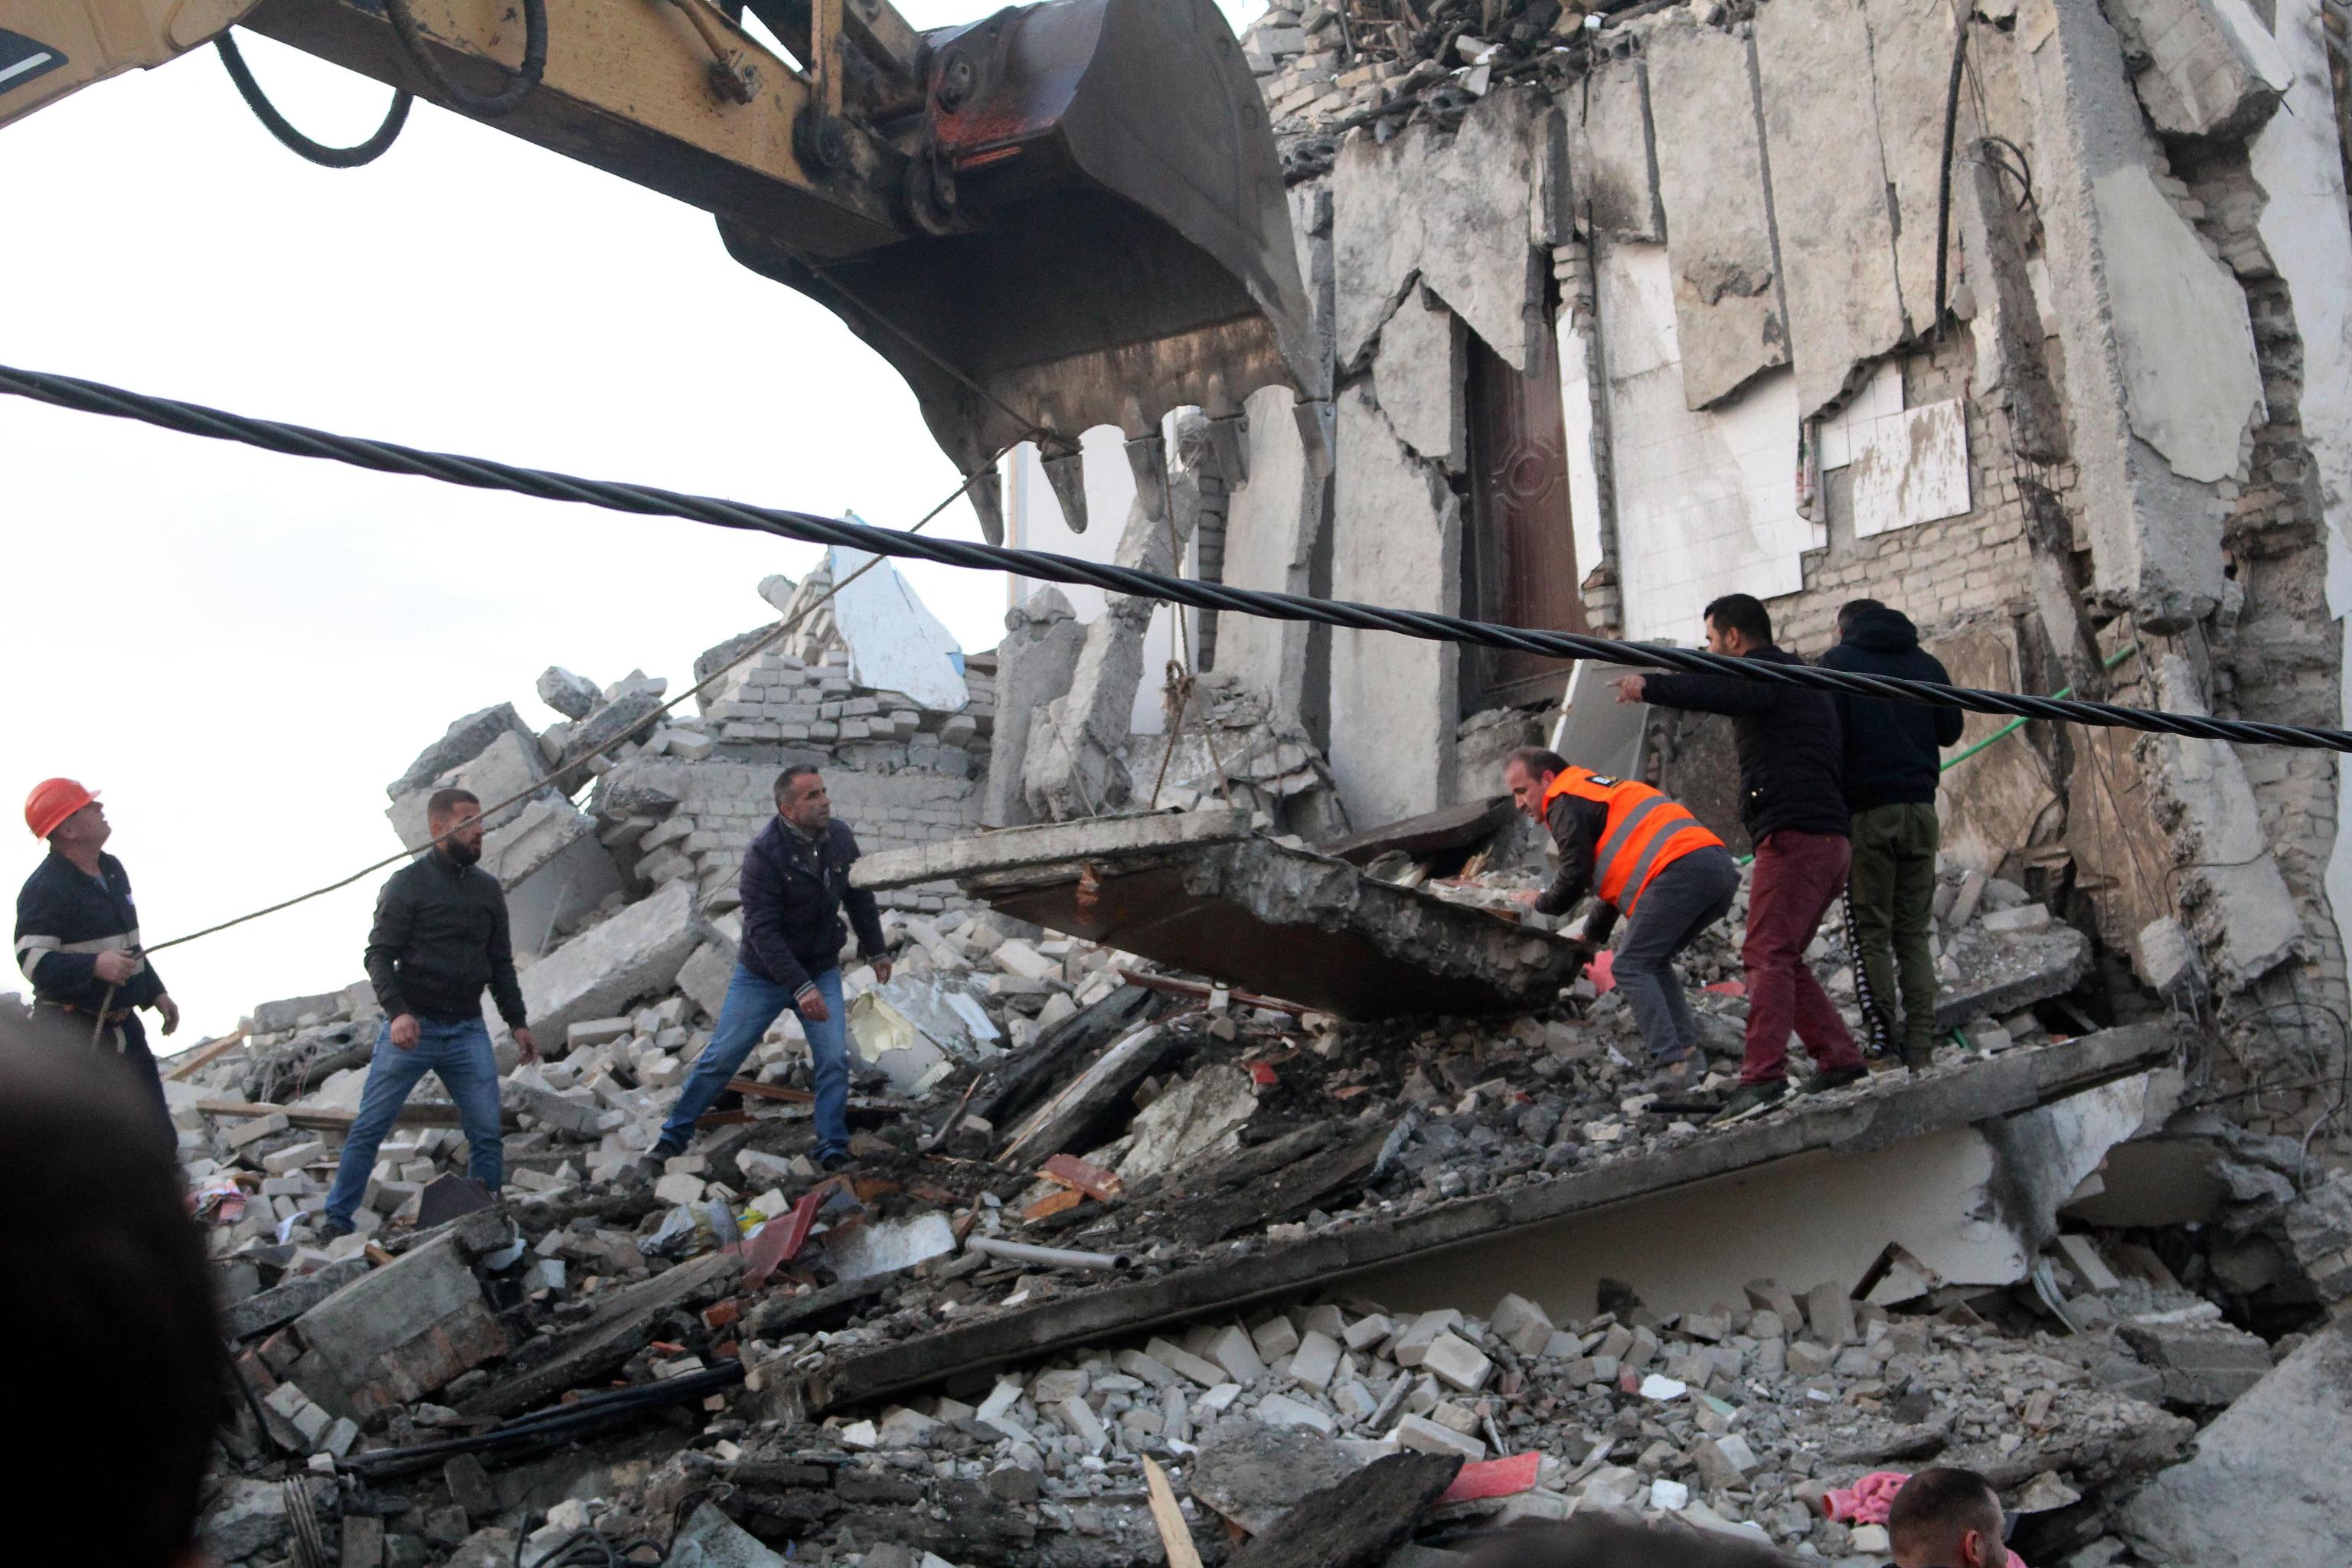 epa08025882 People search for survivors in the rubble of a building after an earthquake hit Thumane, Albania, 25 November 2019. Albania was hit by a 6.4 magnitude earthquake on 26 November 2019, leaving three people dead and dozens injured.  EPA/MALTON DIBRA